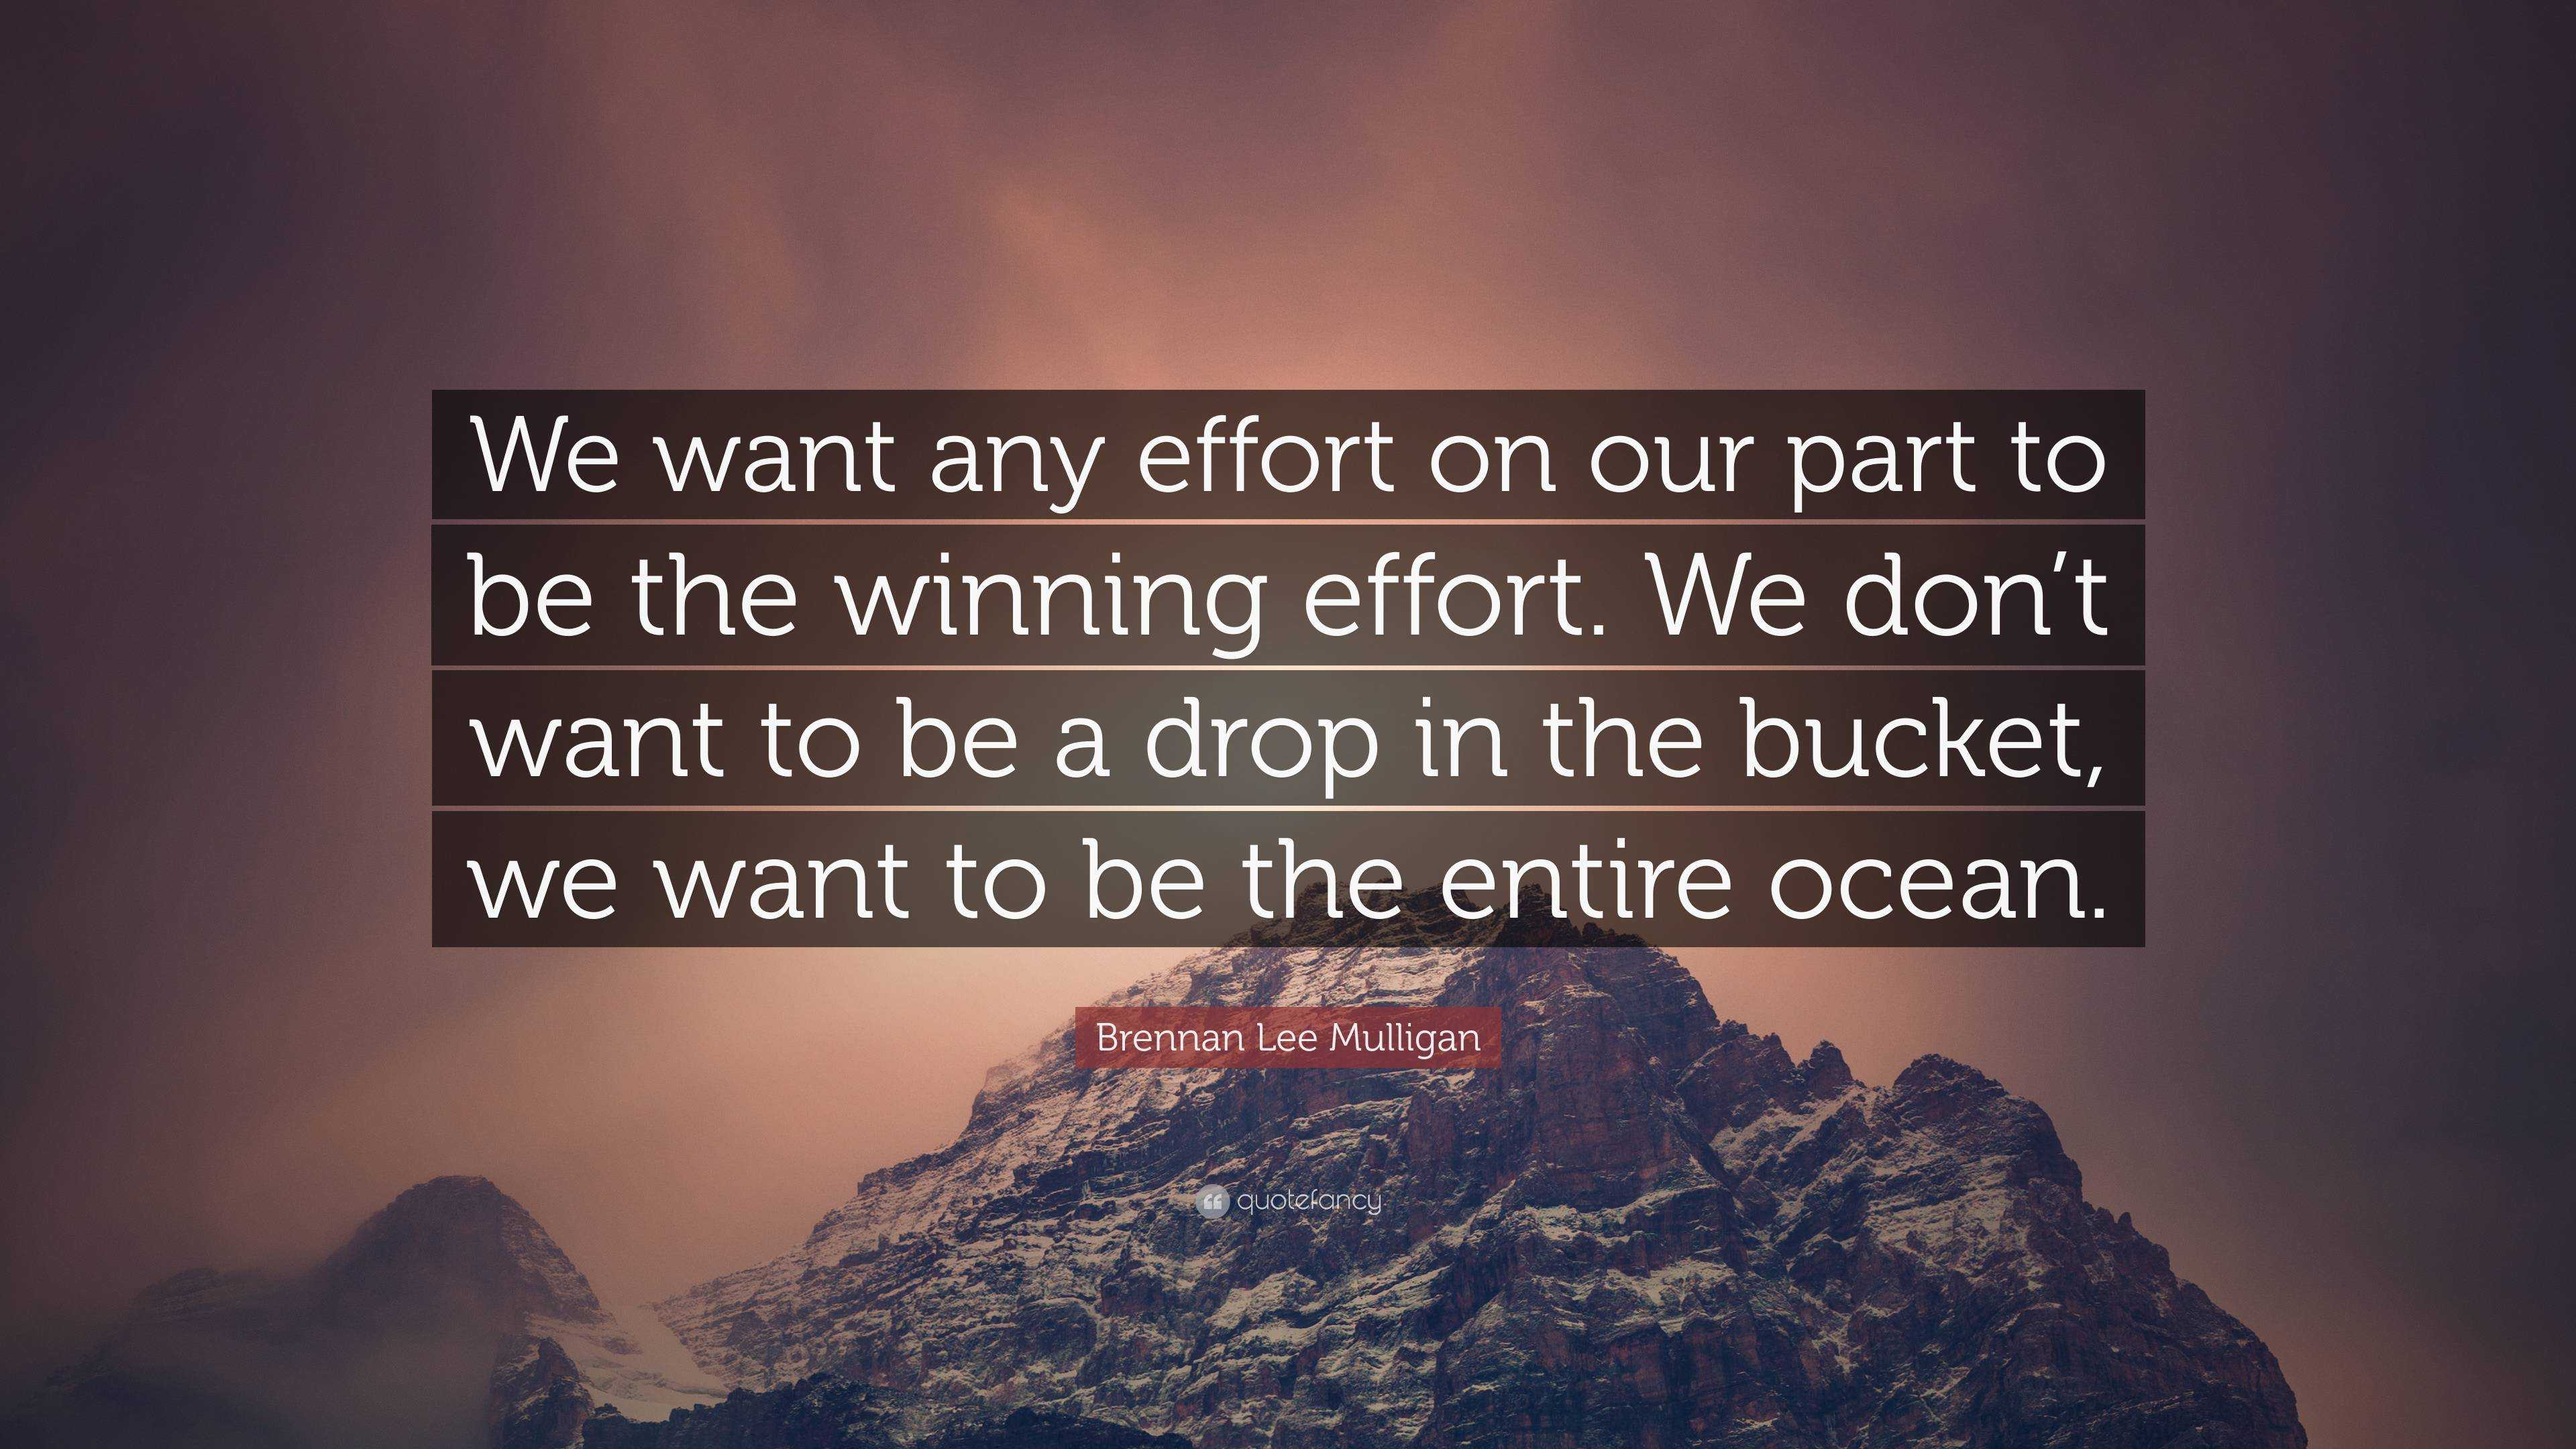 Brennan Lee Mulligan Quote: “We want any effort on our part to be the  winning effort. We don't want to be a drop in the bucket, we want to be the  ent...”